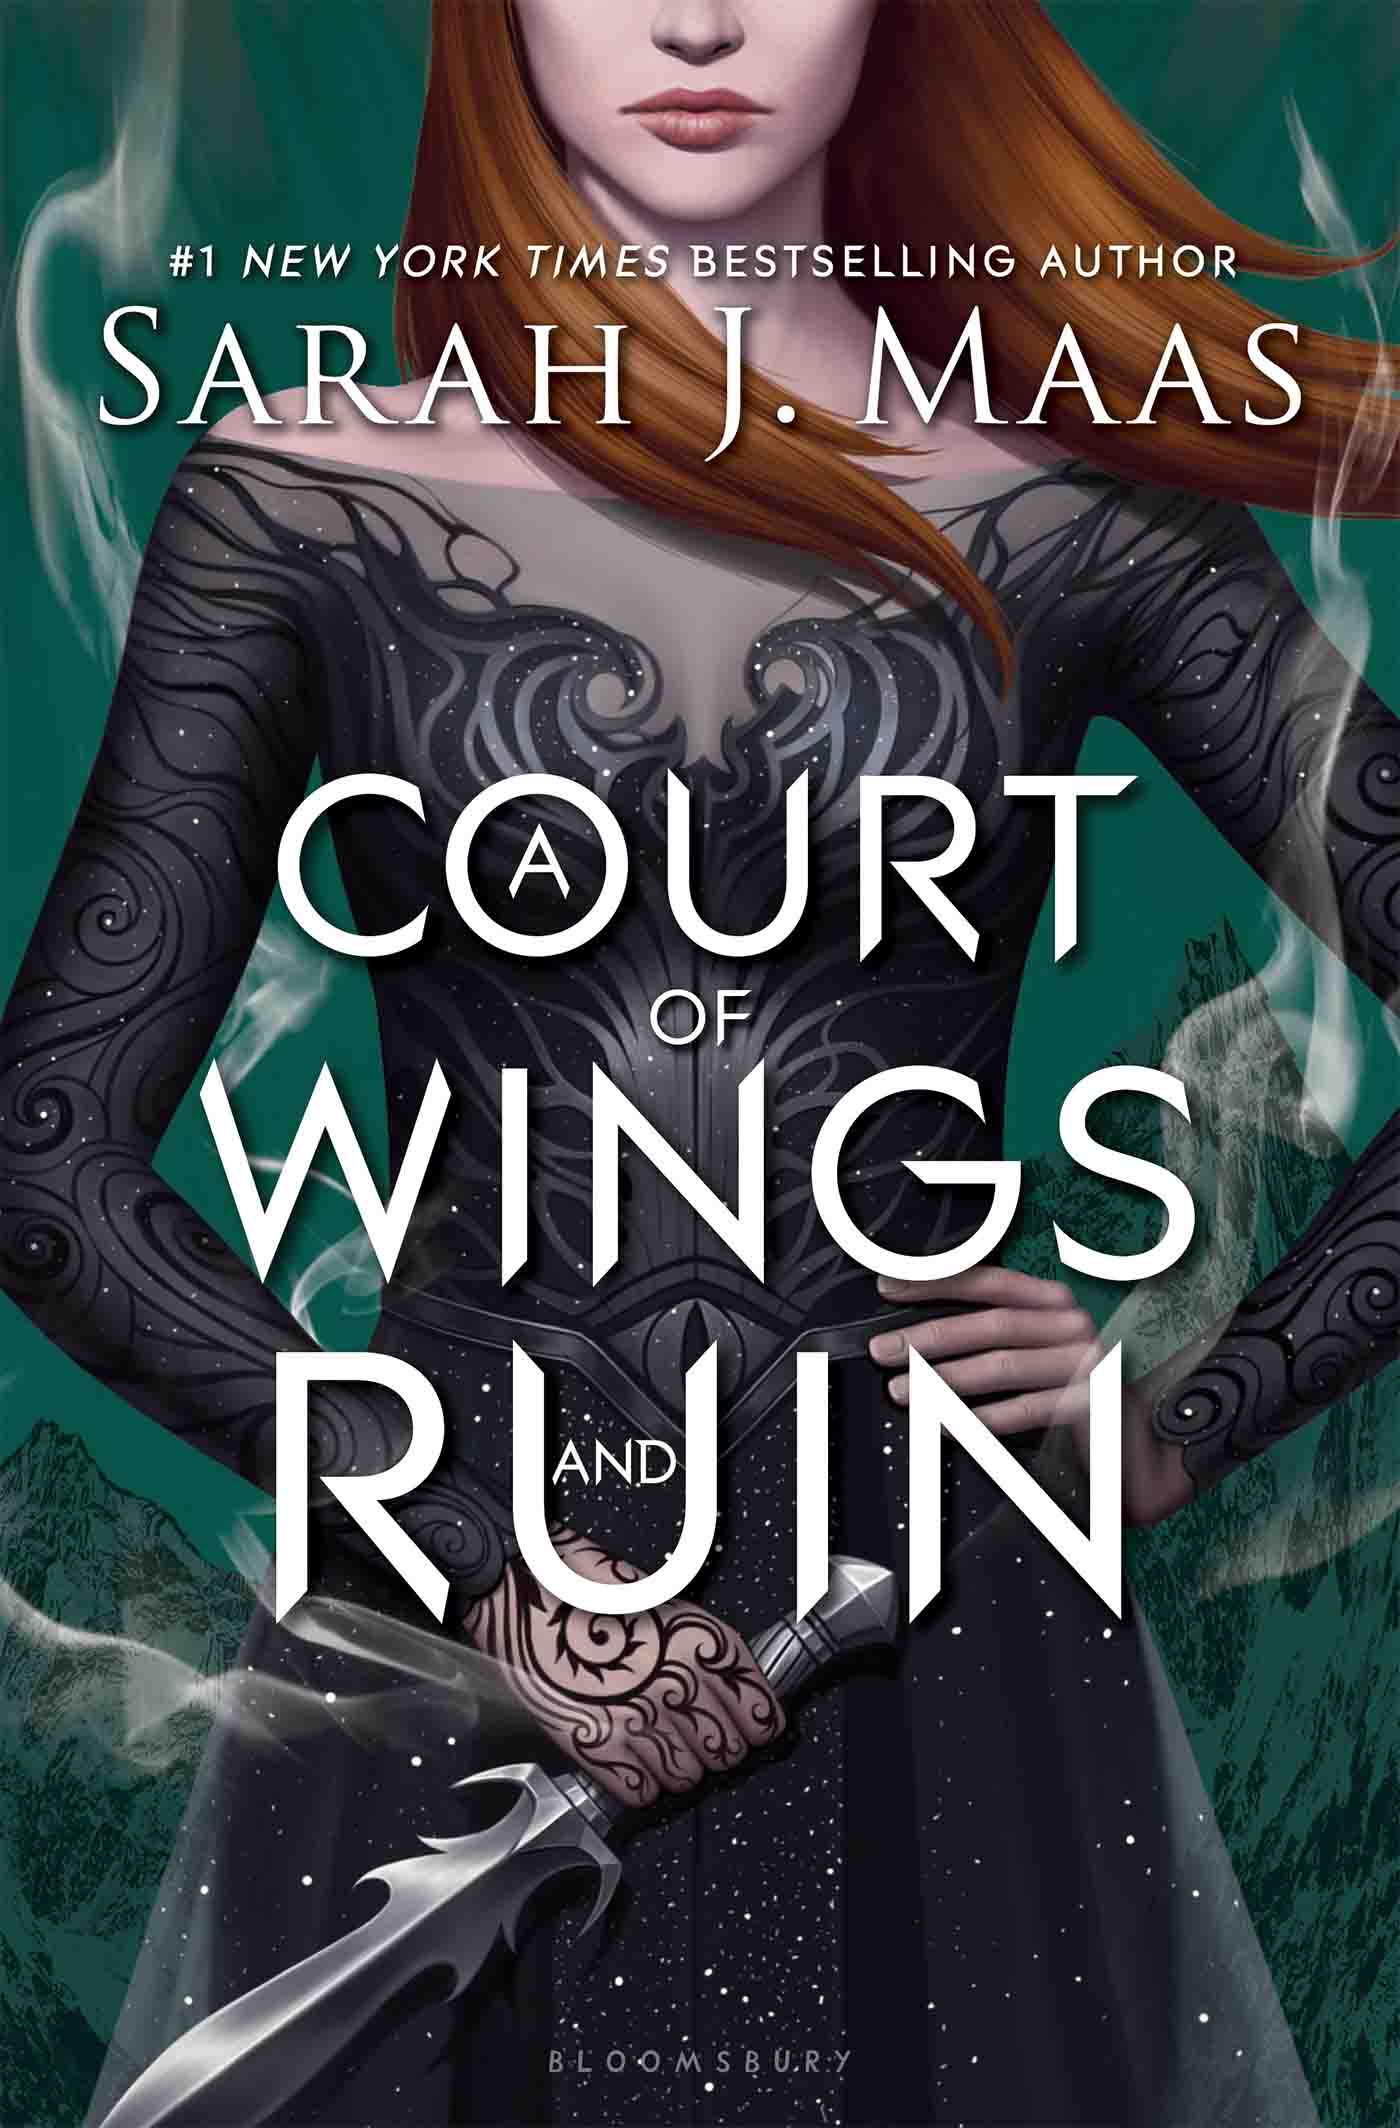 REVIEW: 'A Court of Wings and Ruin' by Sarah J. Maas - Bookstacked